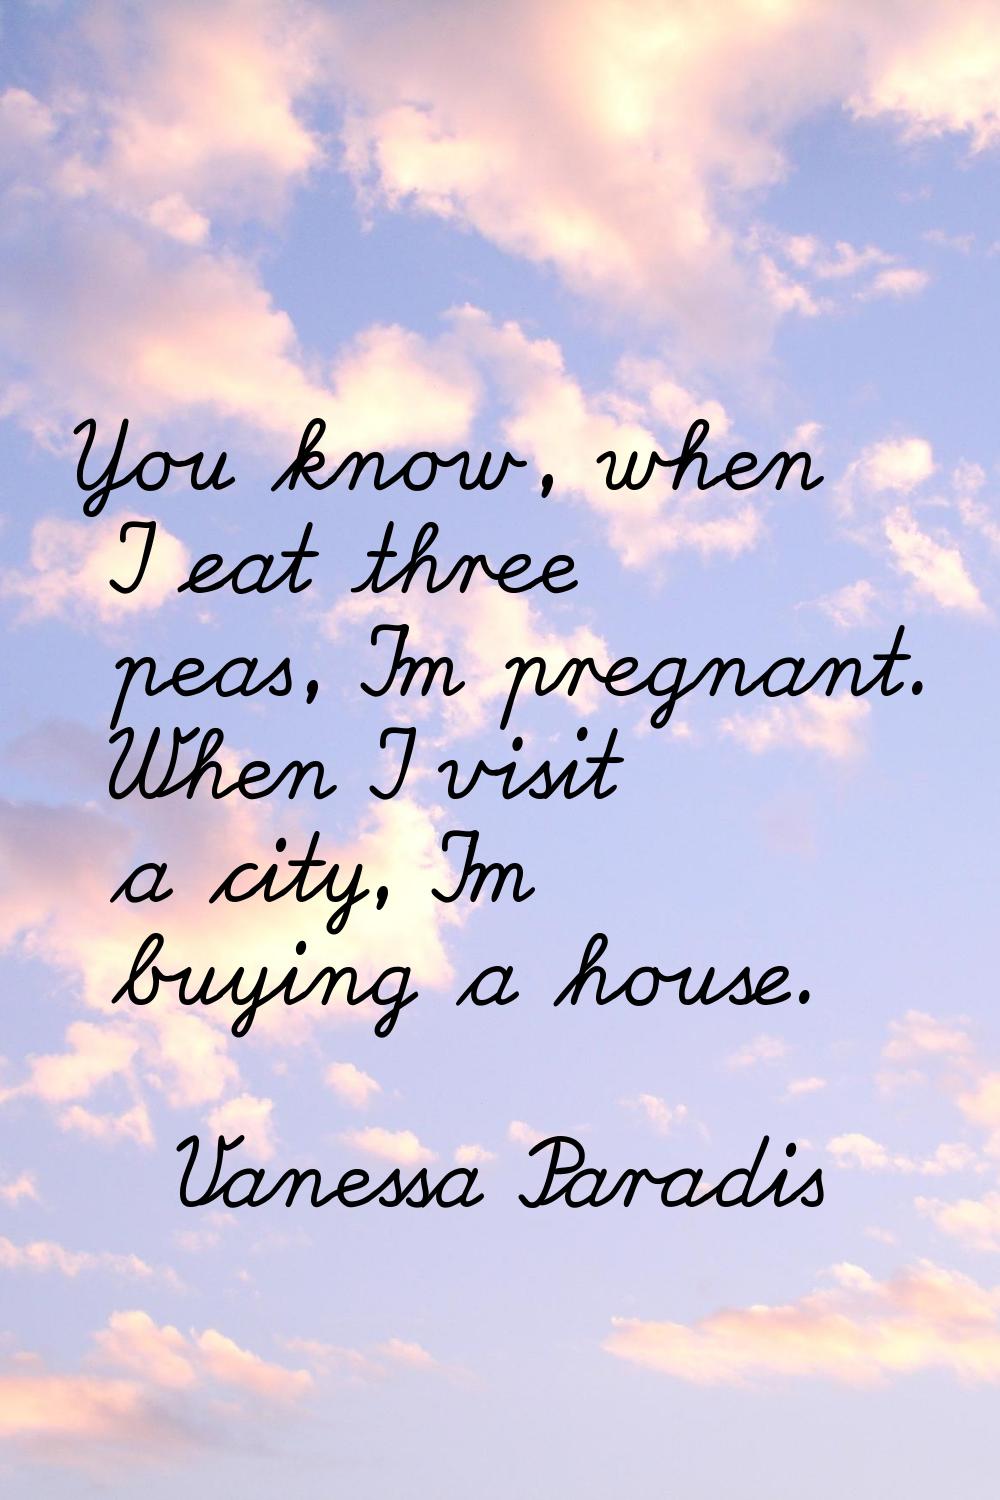 You know, when I eat three peas, I'm pregnant. When I visit a city, I'm buying a house.